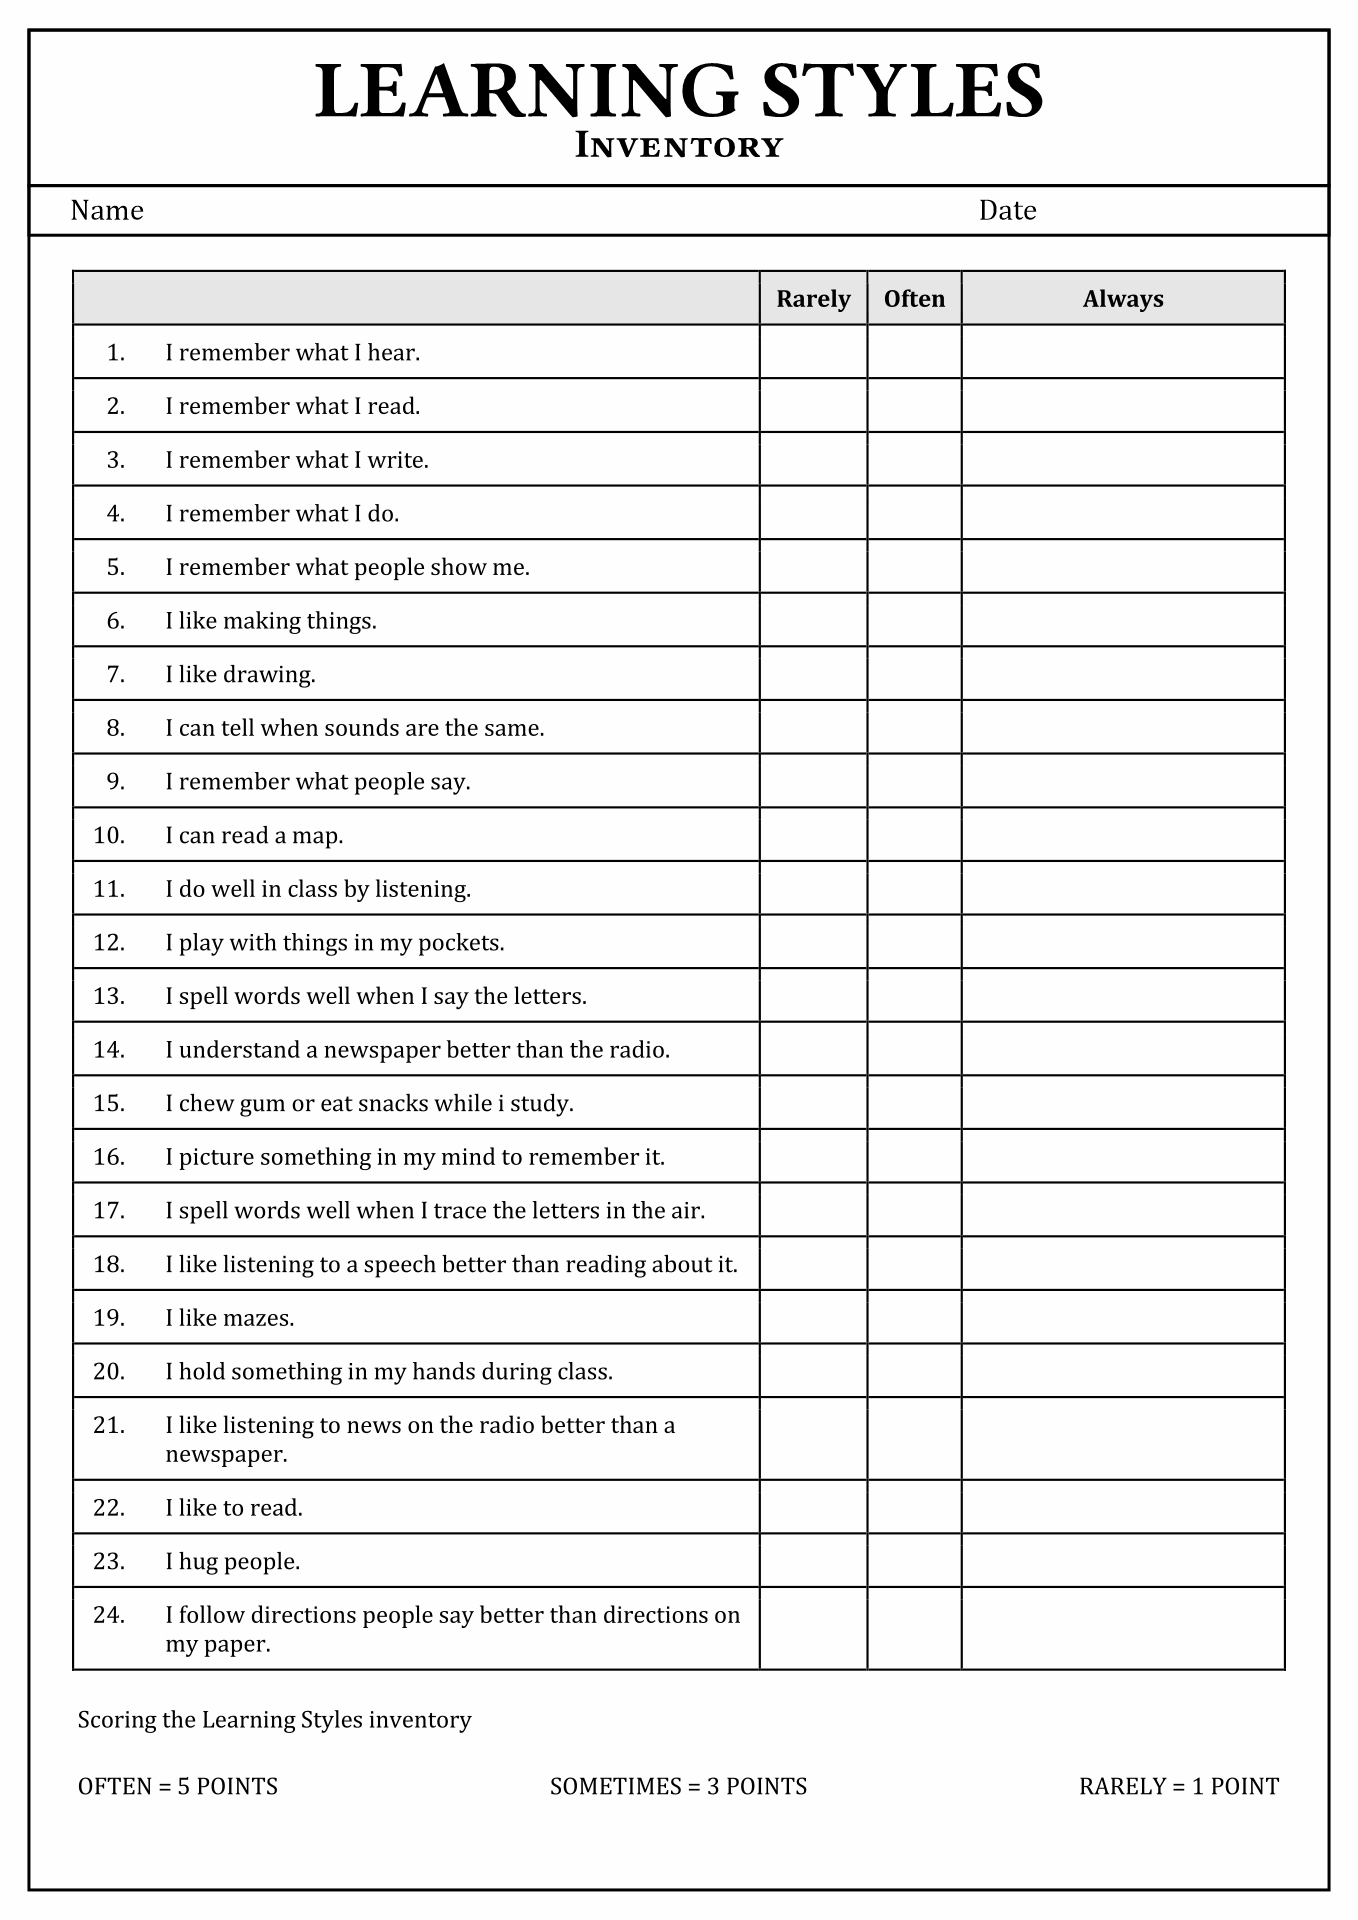 13-best-images-of-learning-styles-inventory-worksheet-printable-vrogue